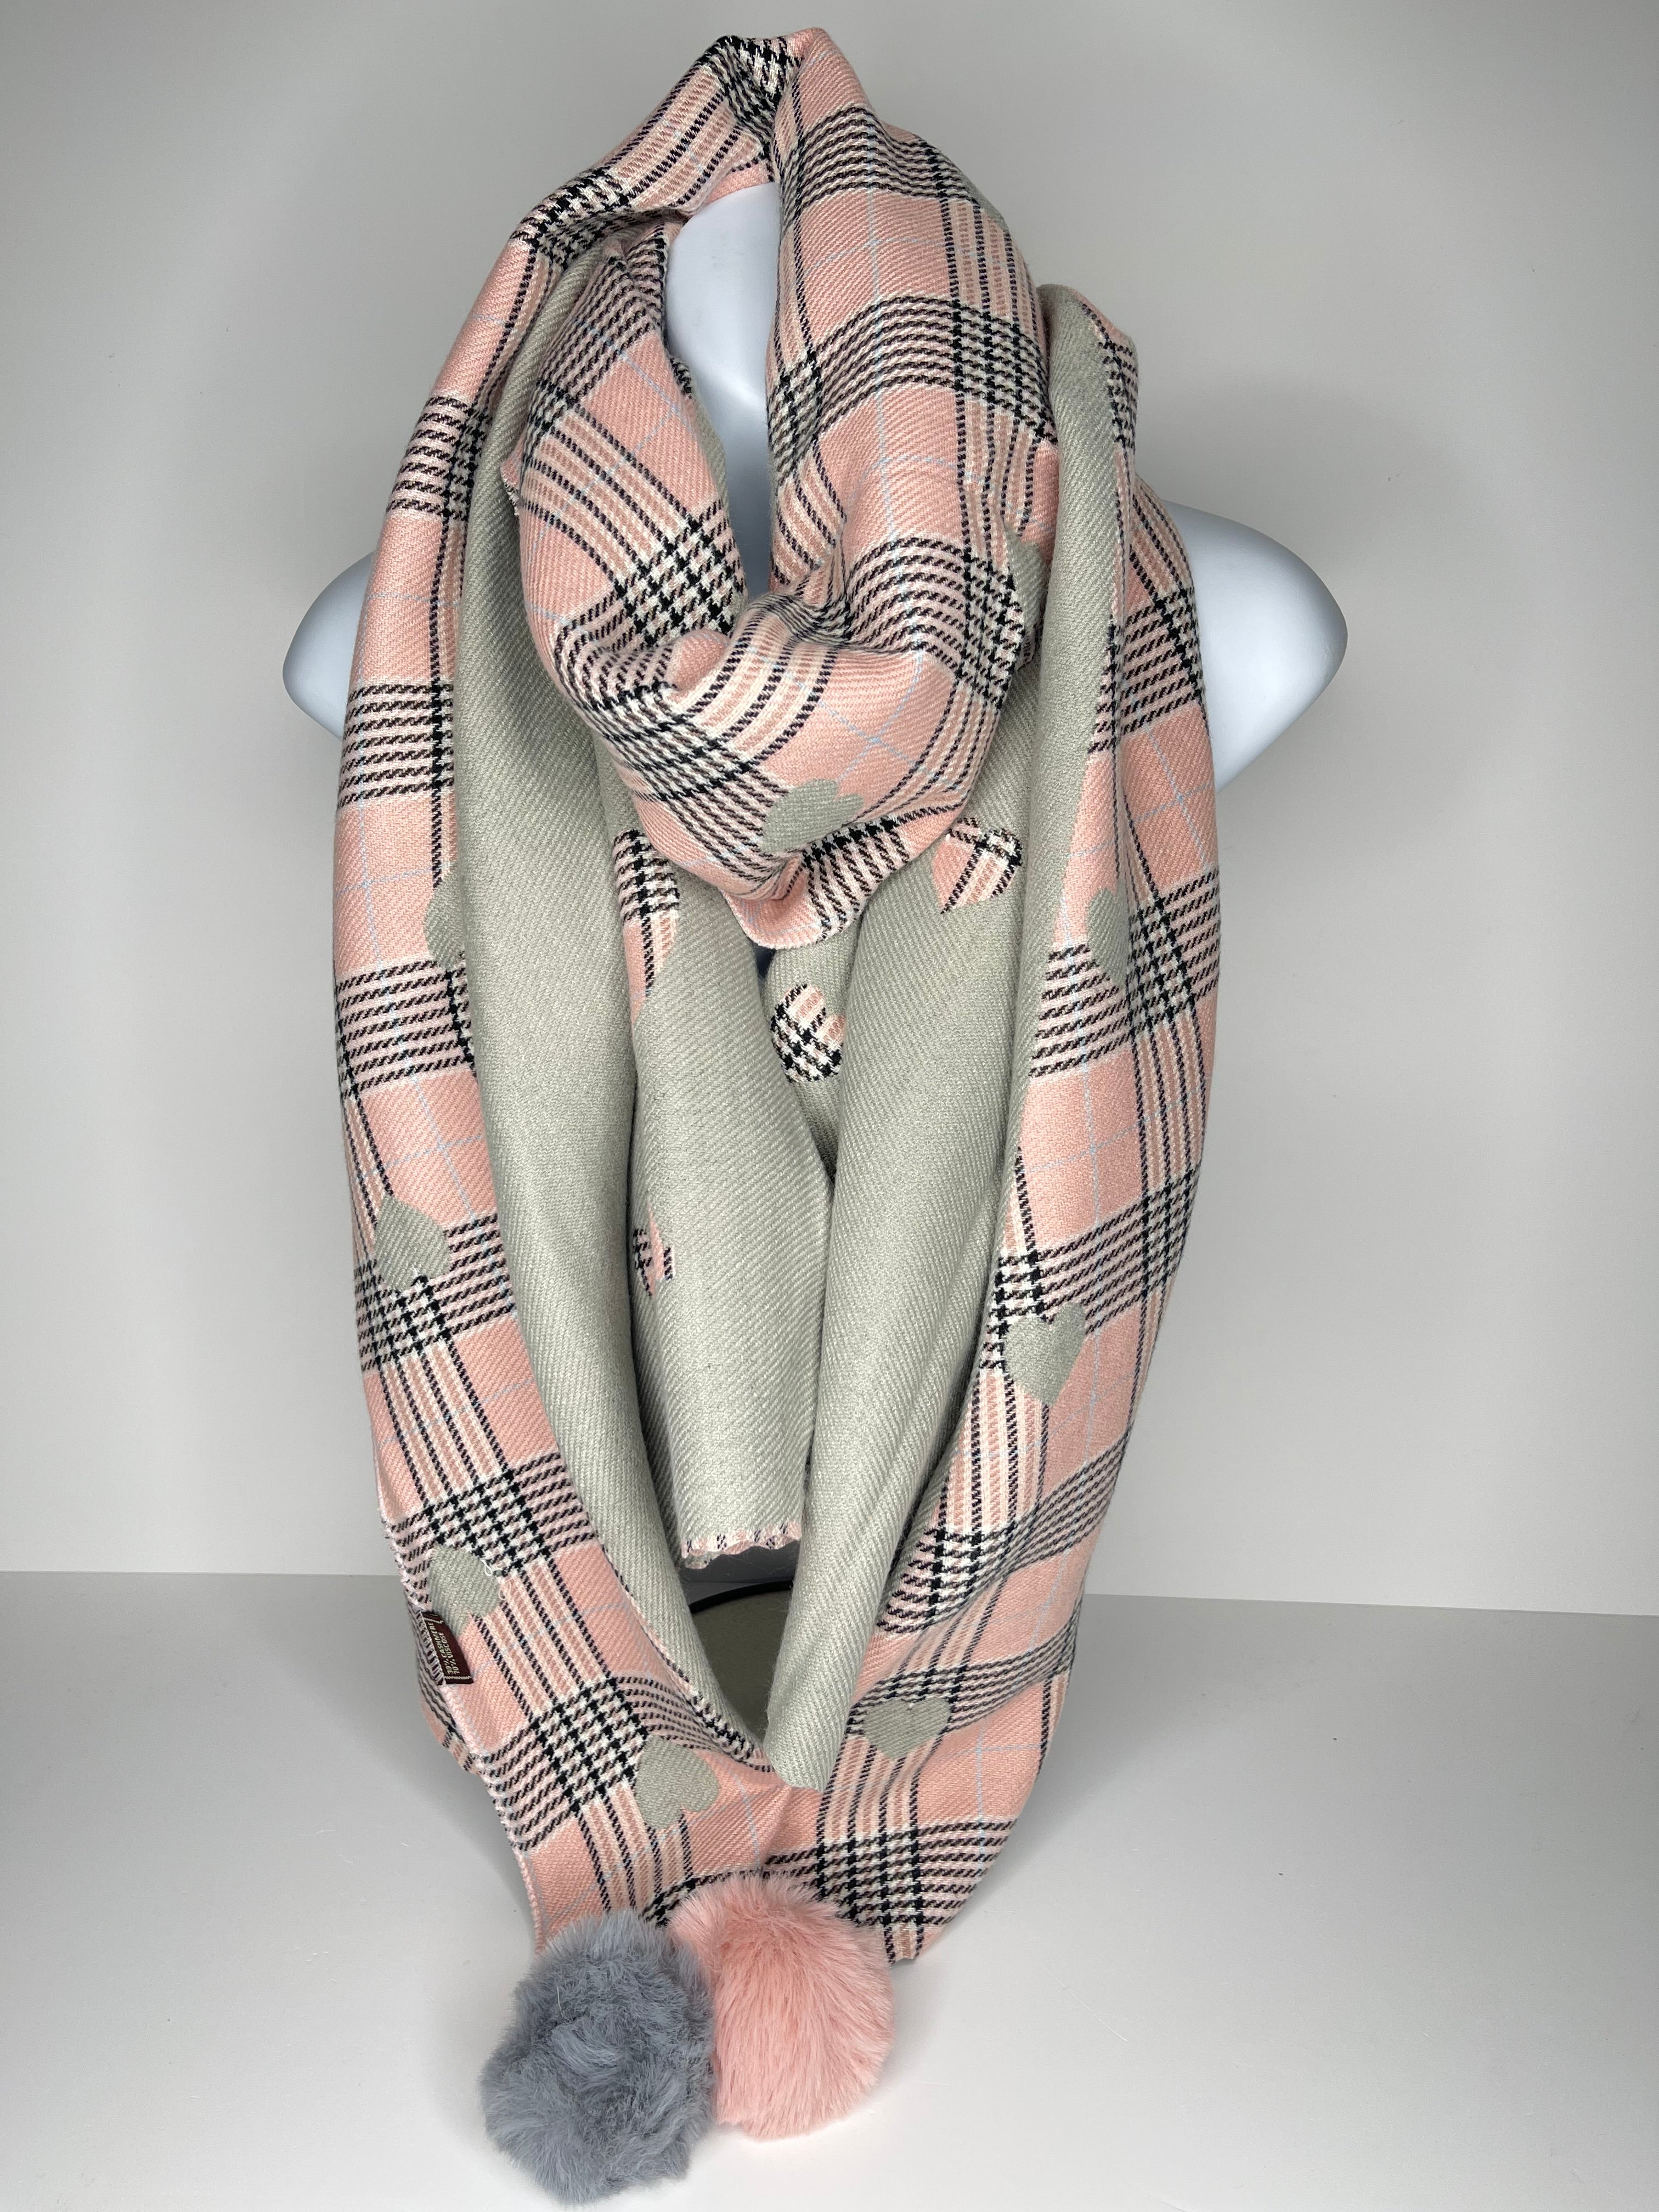 Winter weight, cashmere-mix, reversible checkered heart print scarf in shades of light grey, light pink and black, with faux pom-ends